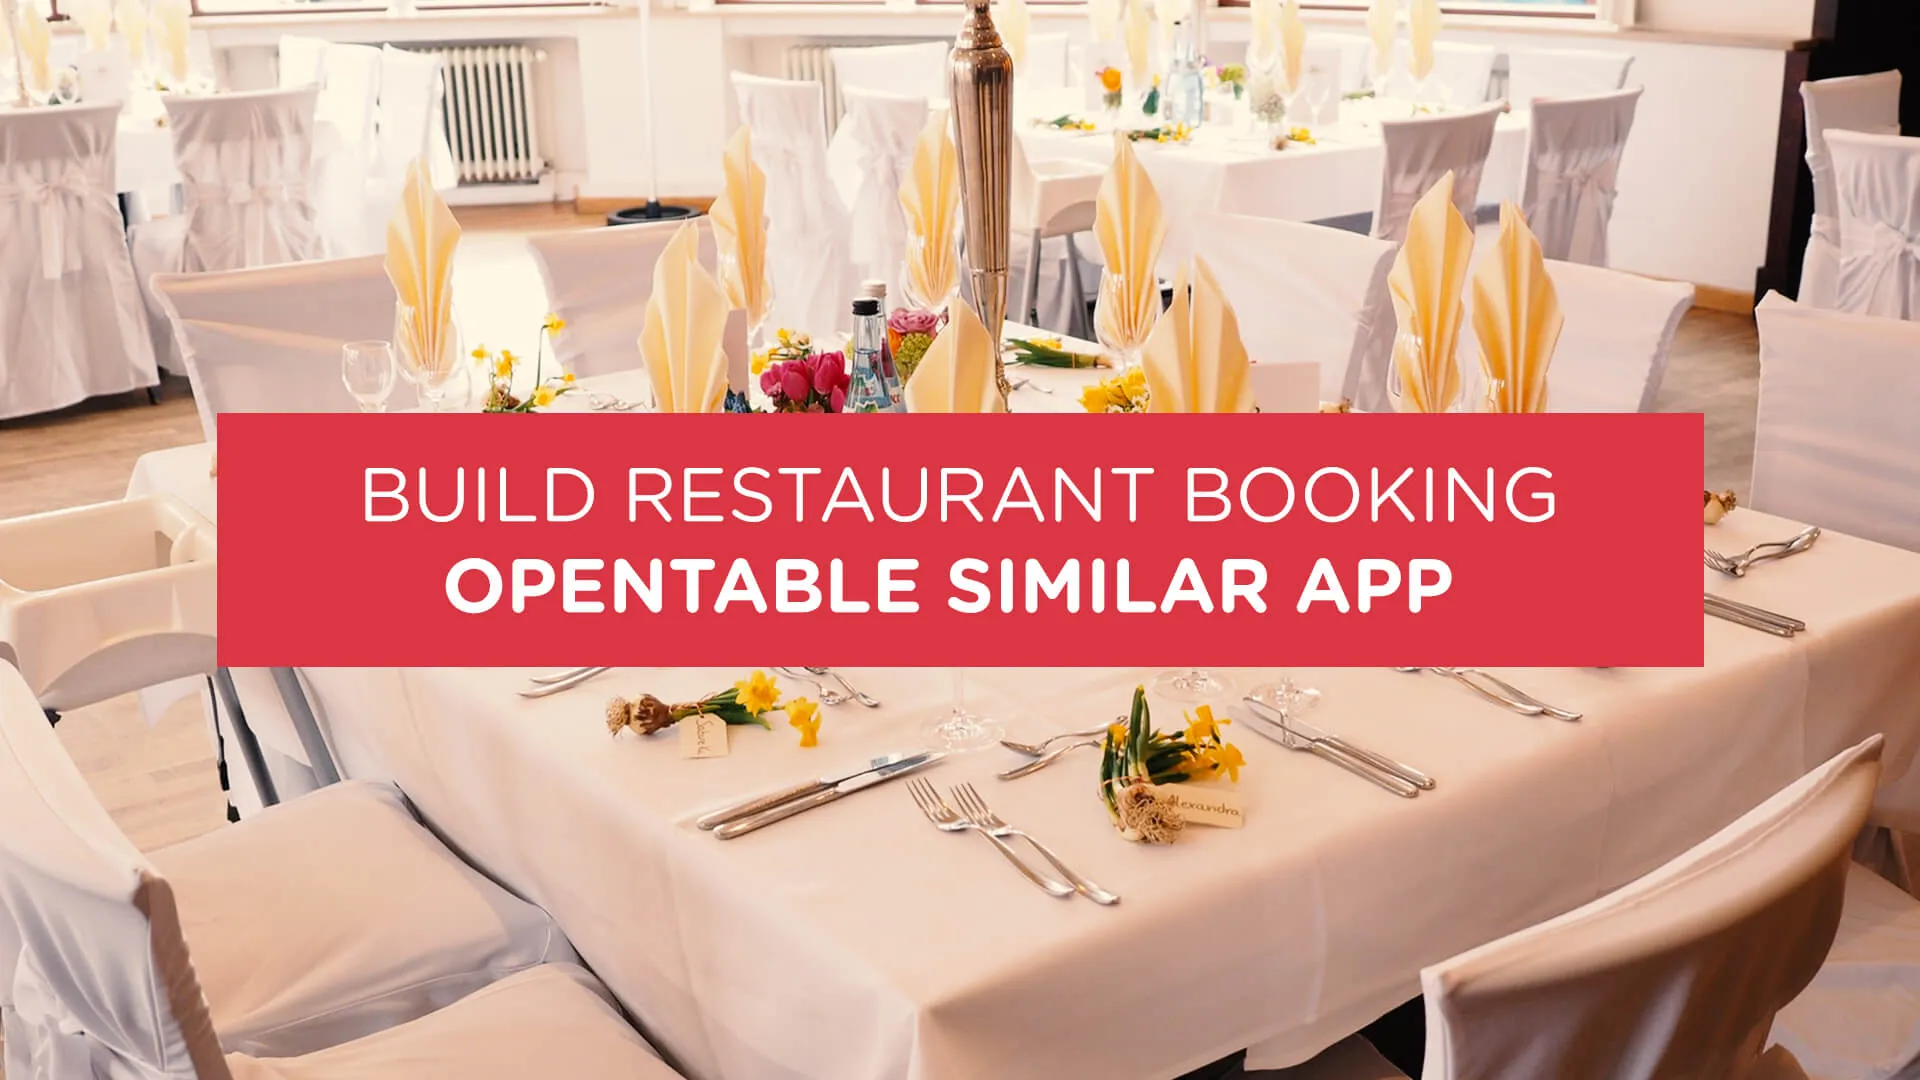 OpenTable now offers diners some restaurant seating flexibility